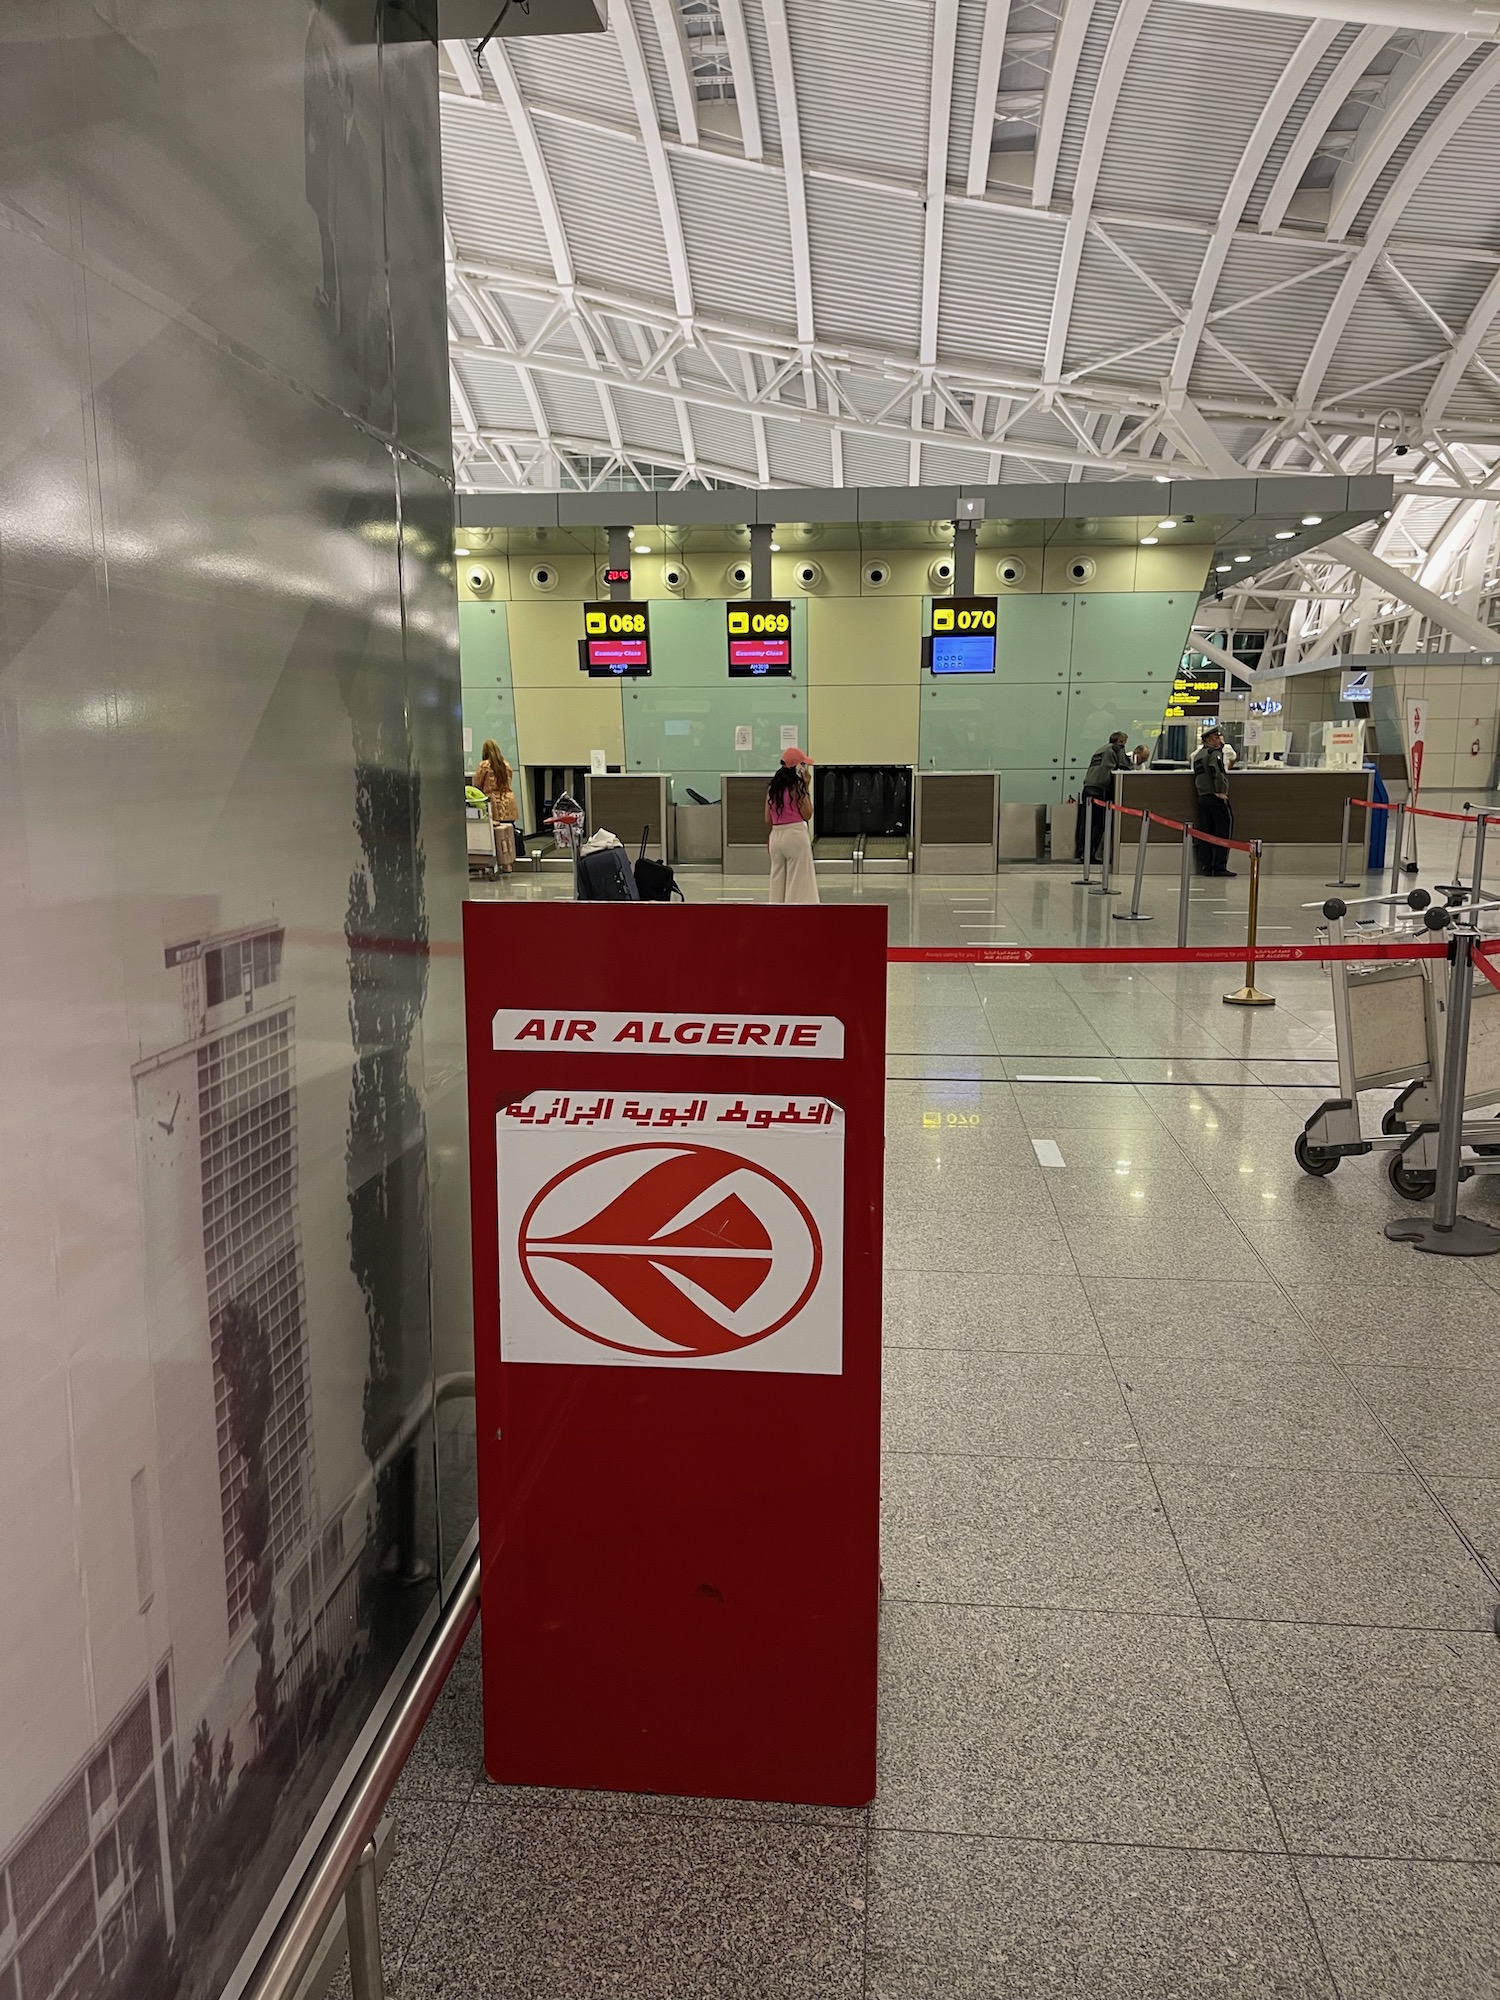 a red sign in a airport